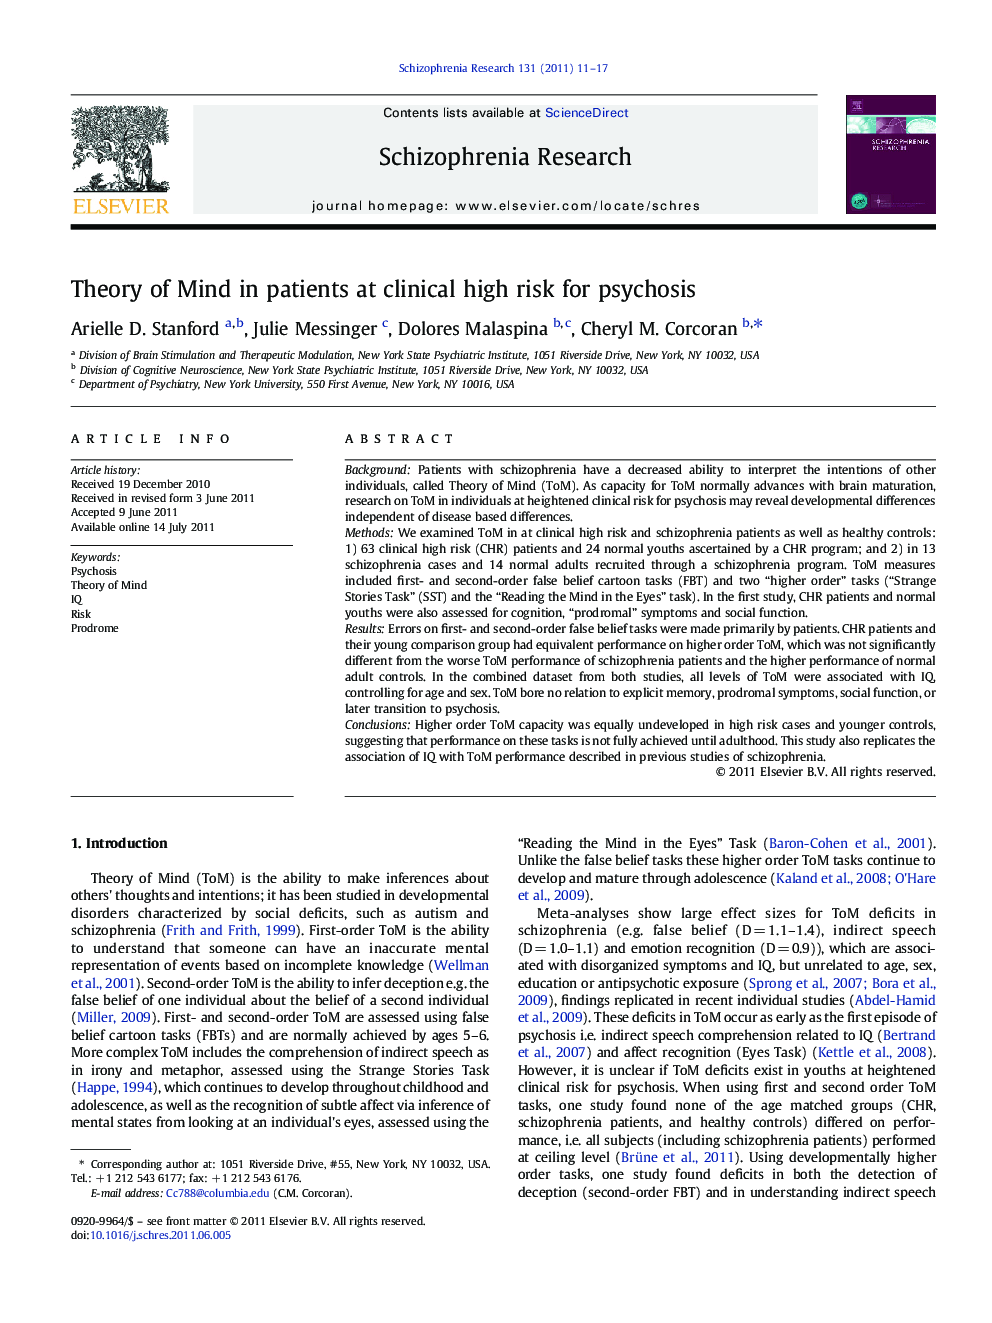 Theory of Mind in patients at clinical high risk for psychosis